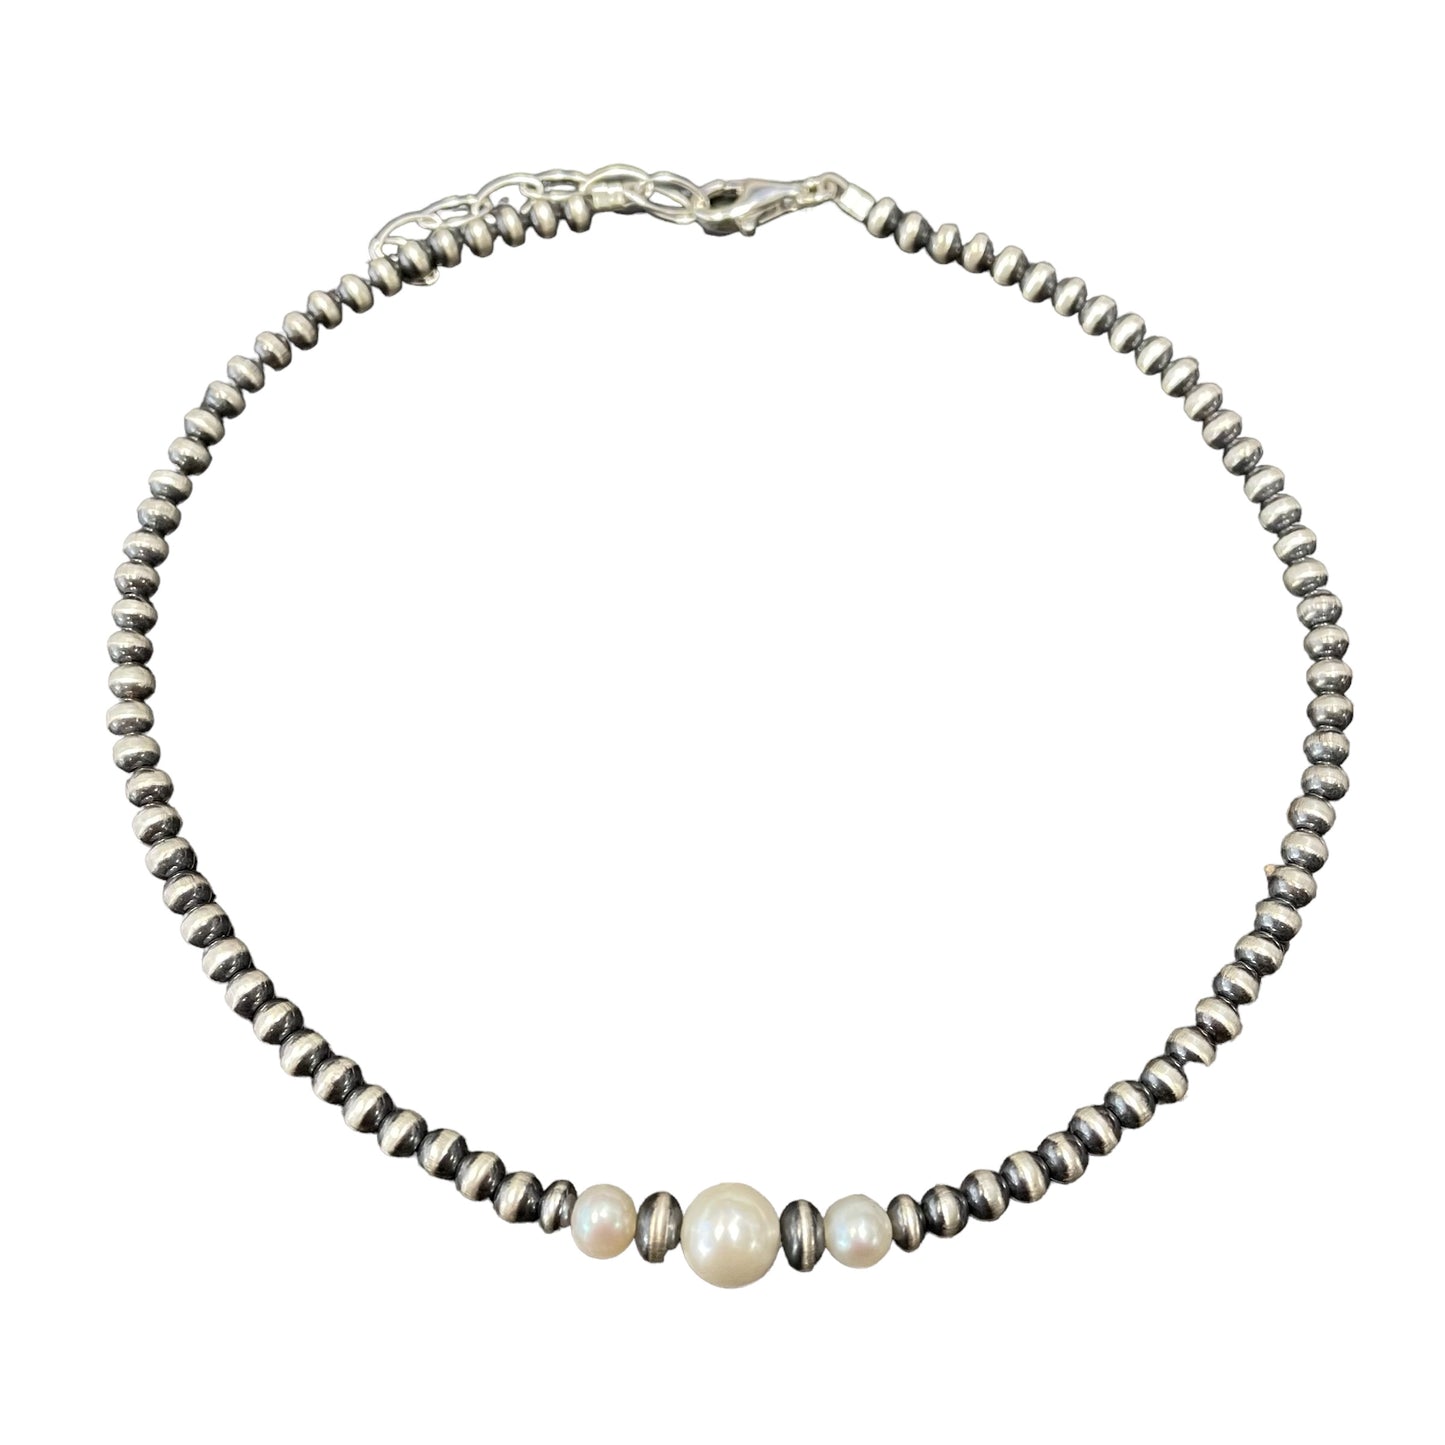 Pearl Desert Bead Oxidized Necklace Sterling Silver